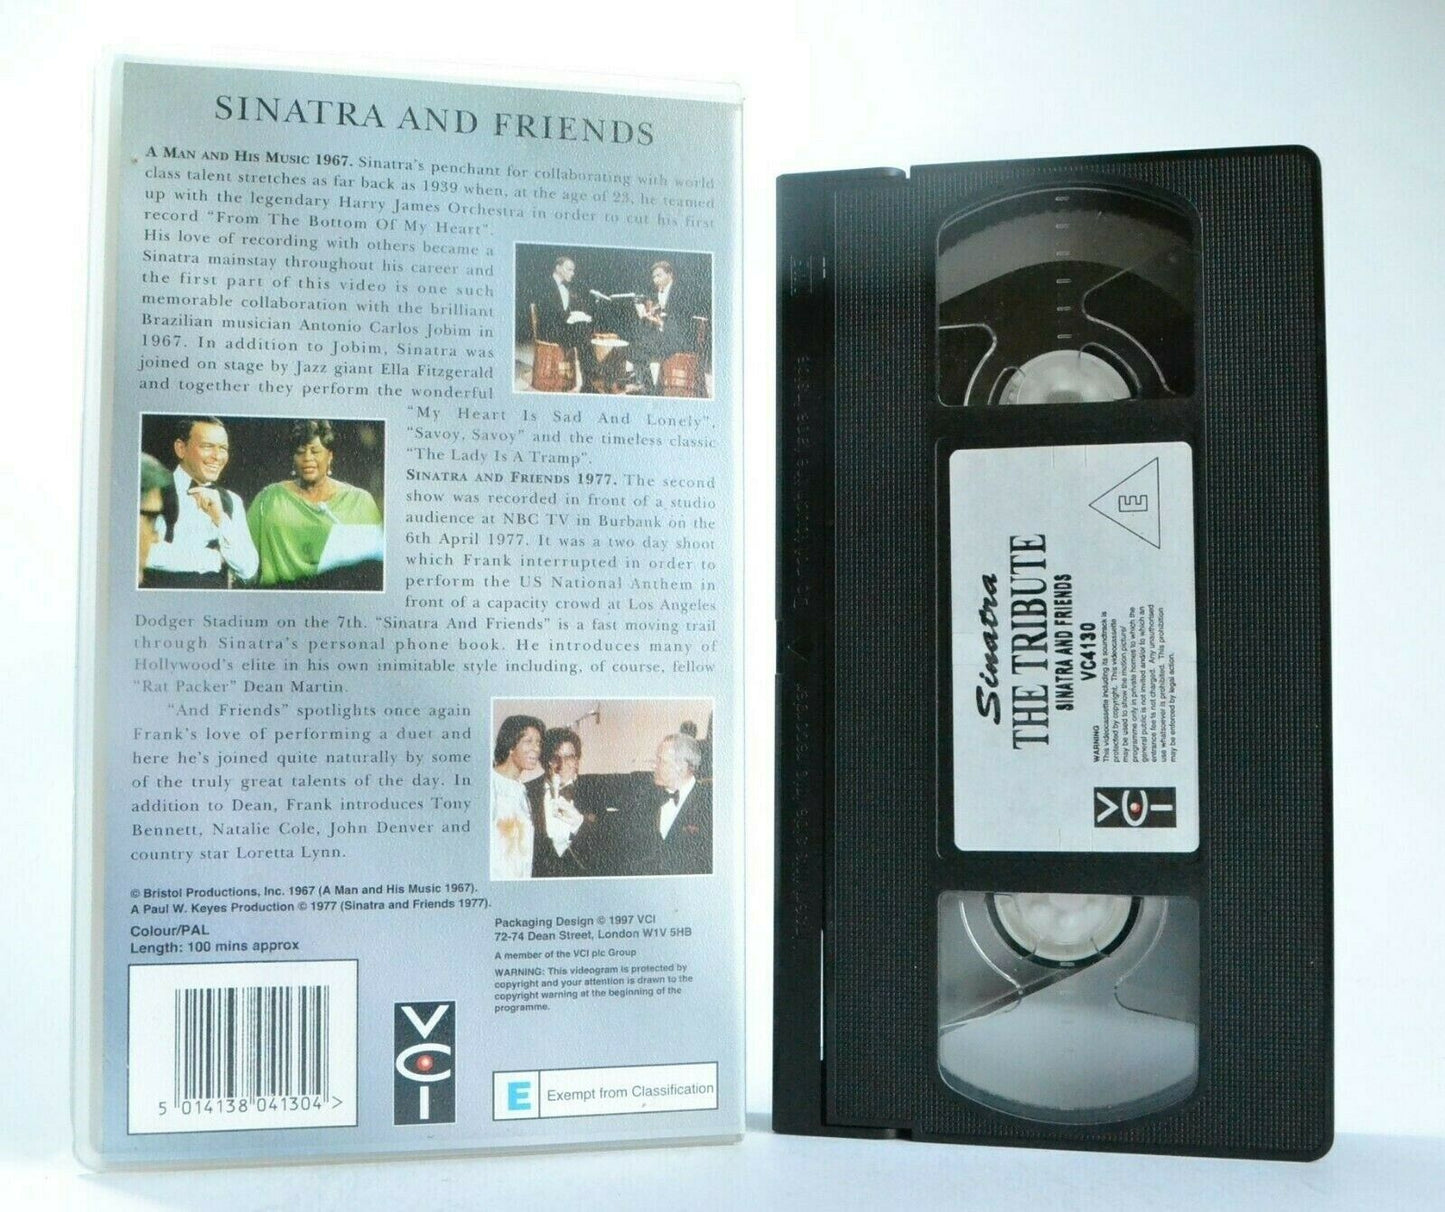 Frank Sinatra: The Tribute - Sinatra And Friends (1977) - Live Music - Pal VHS-